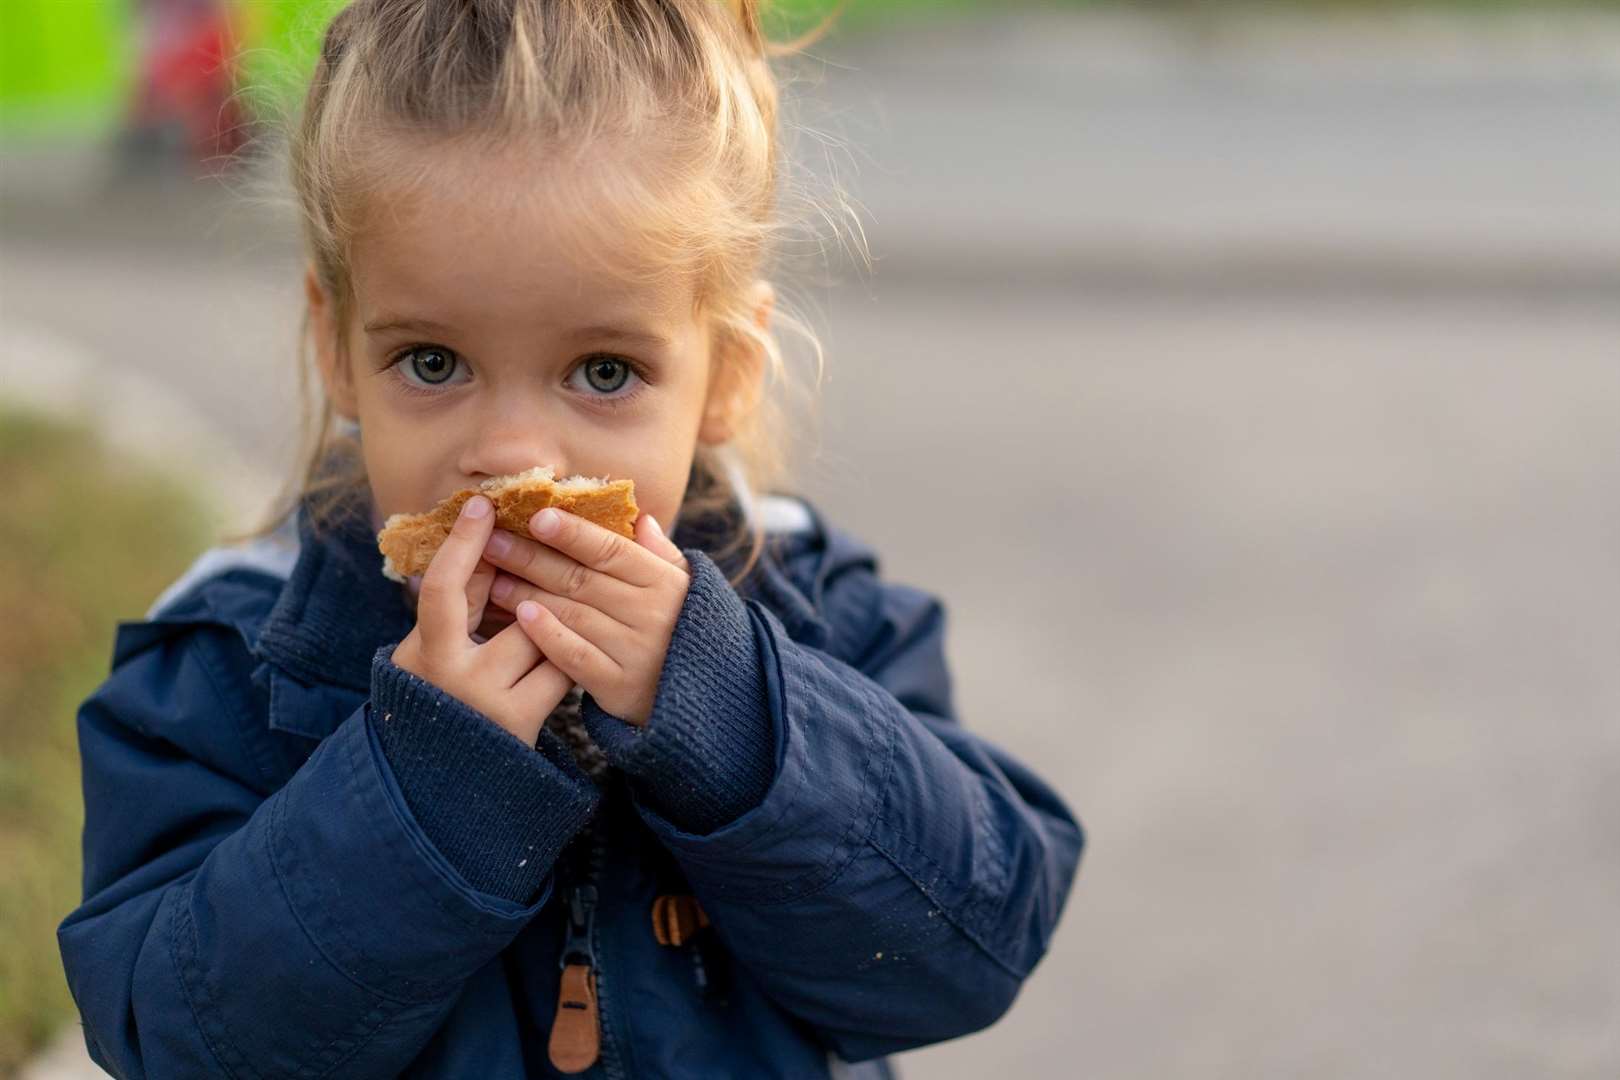 A Twitter campaign has raised more than £21,000 for children using food banks to enjoy Happy Meals. Image: iStock.